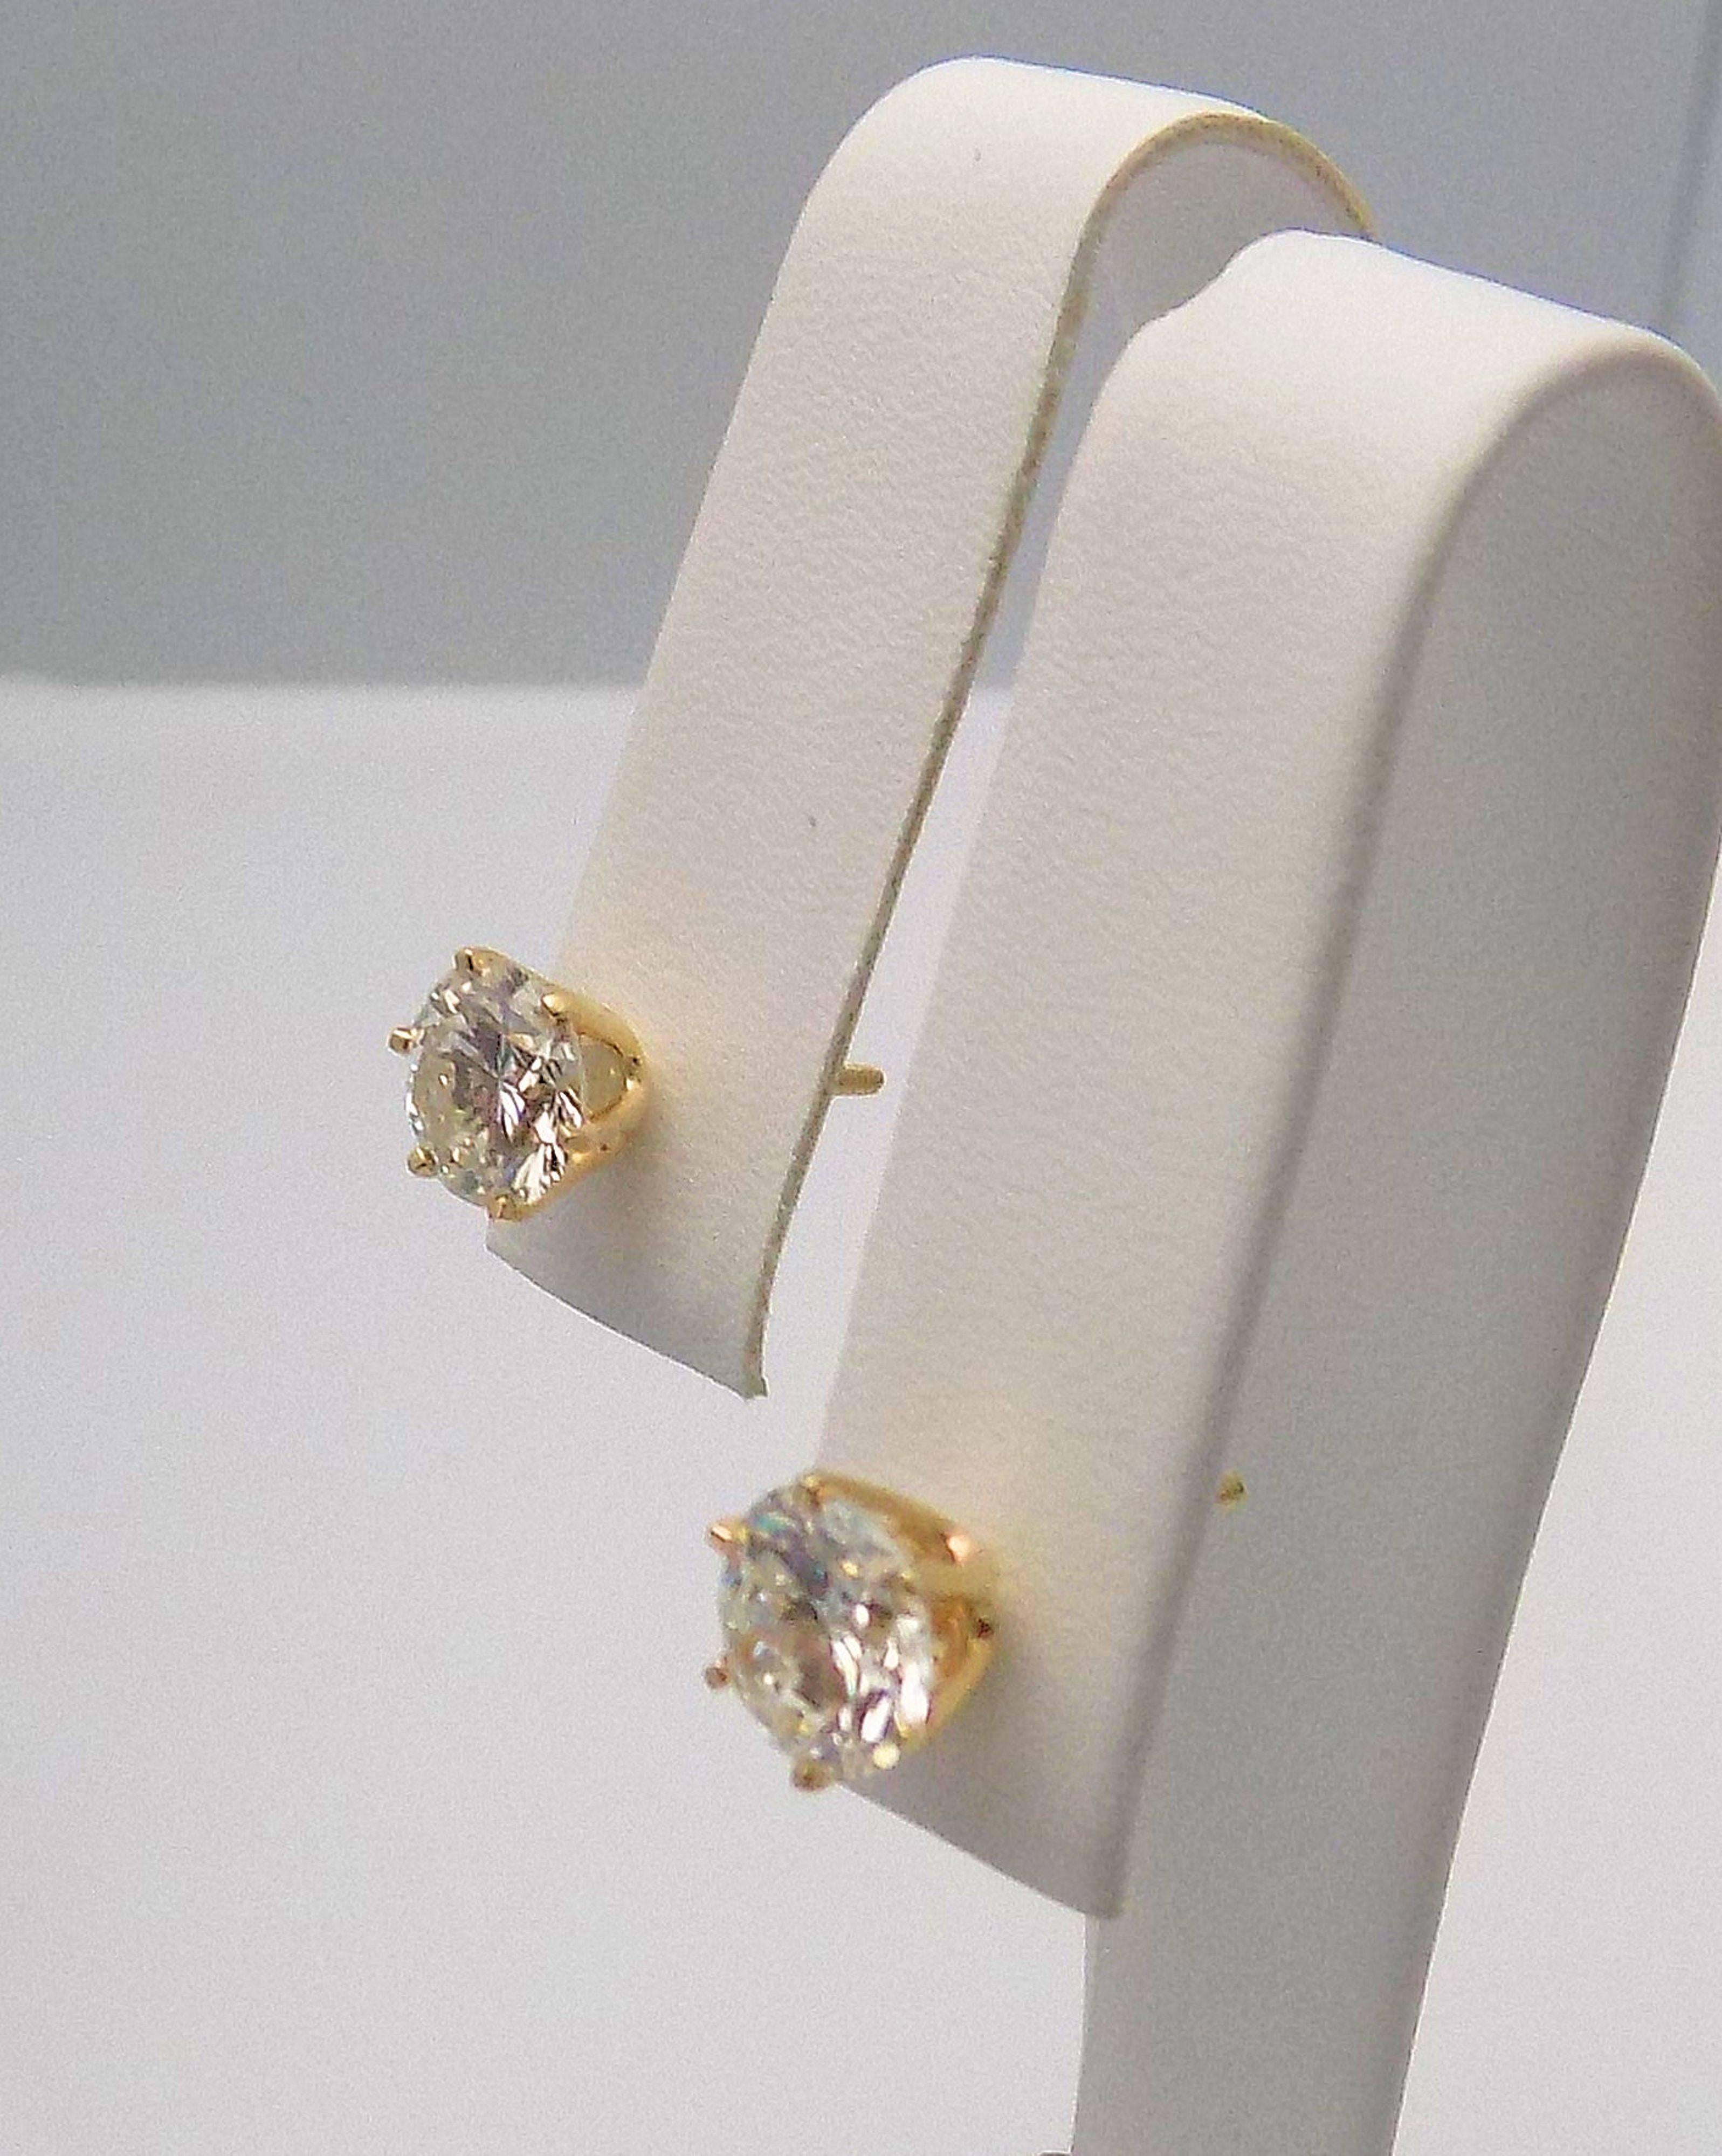 Pair 14 Karat Yellow Gold and Diamond Stud Earrings with Screw Backs. 2 Round Brilliant Diamonds 2.75 Carat Total Weight, Laser Treated I-1, I-J. 1.1 DWT or 1.71 Grams.